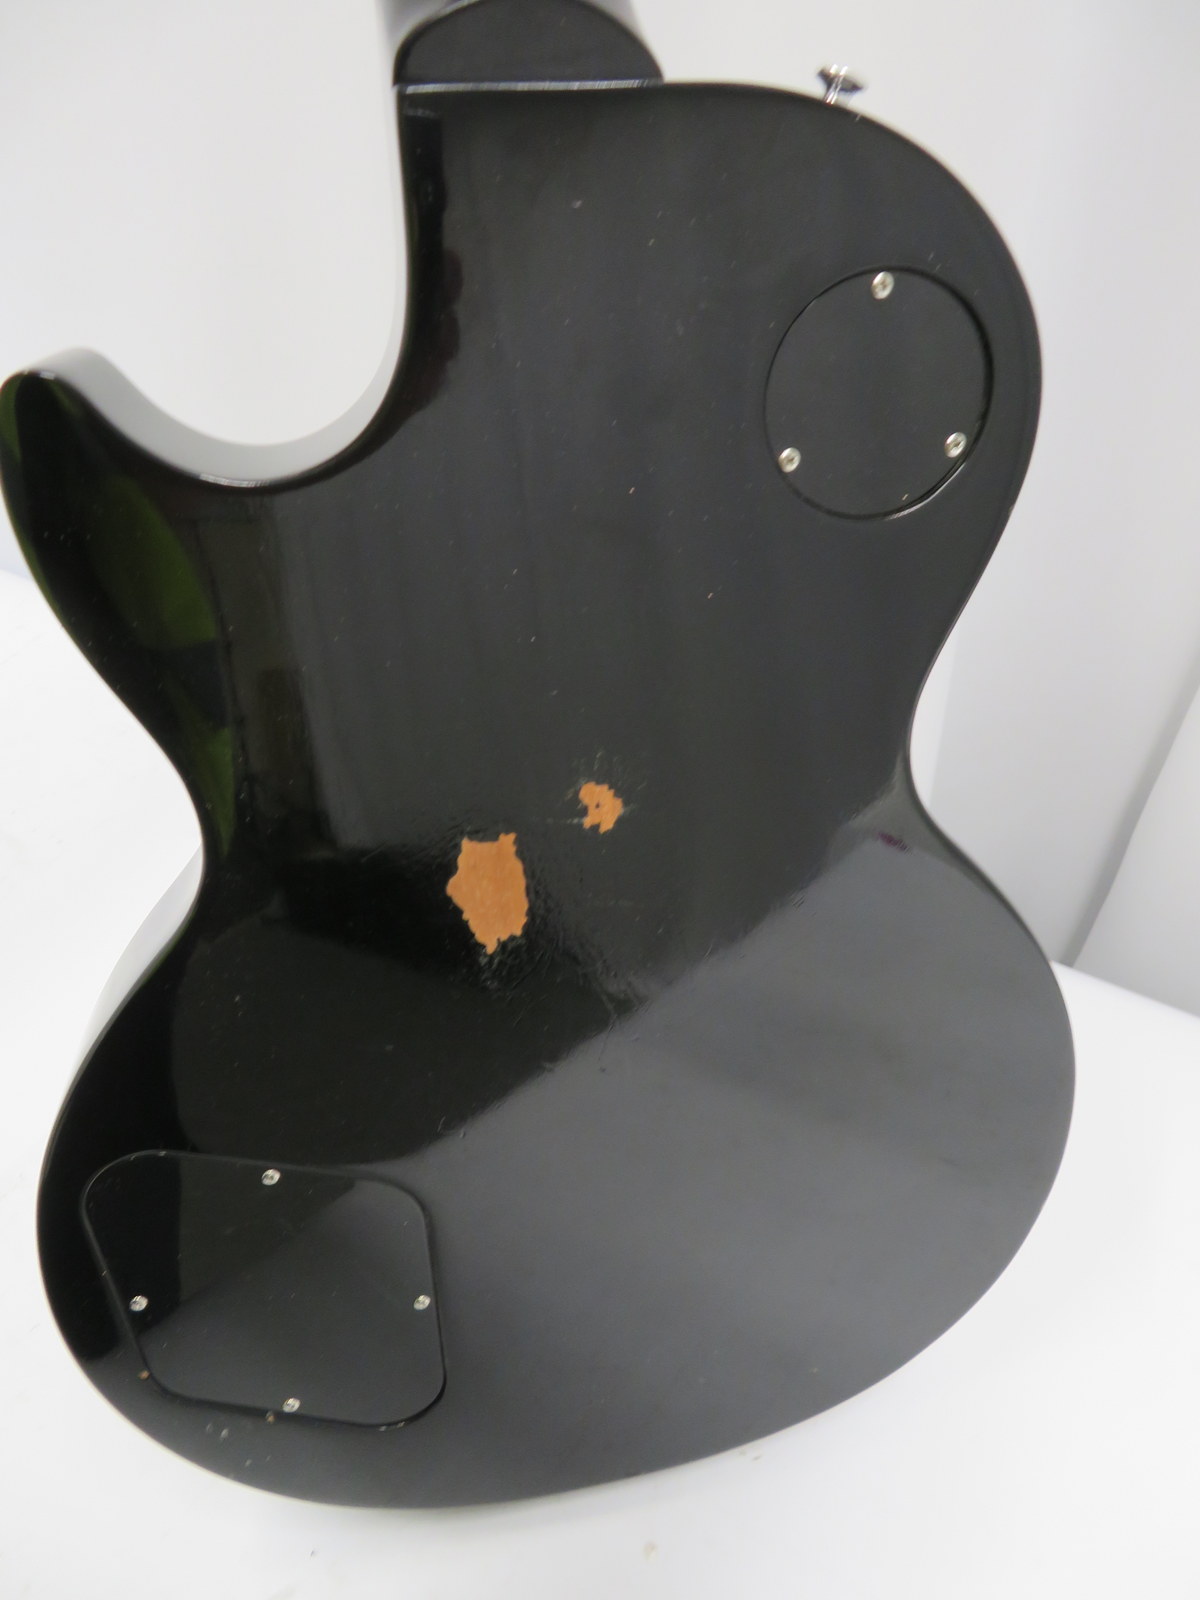 Gibson Les Paul electric guitar in flight case. Serial number: 124200693. - Image 11 of 13